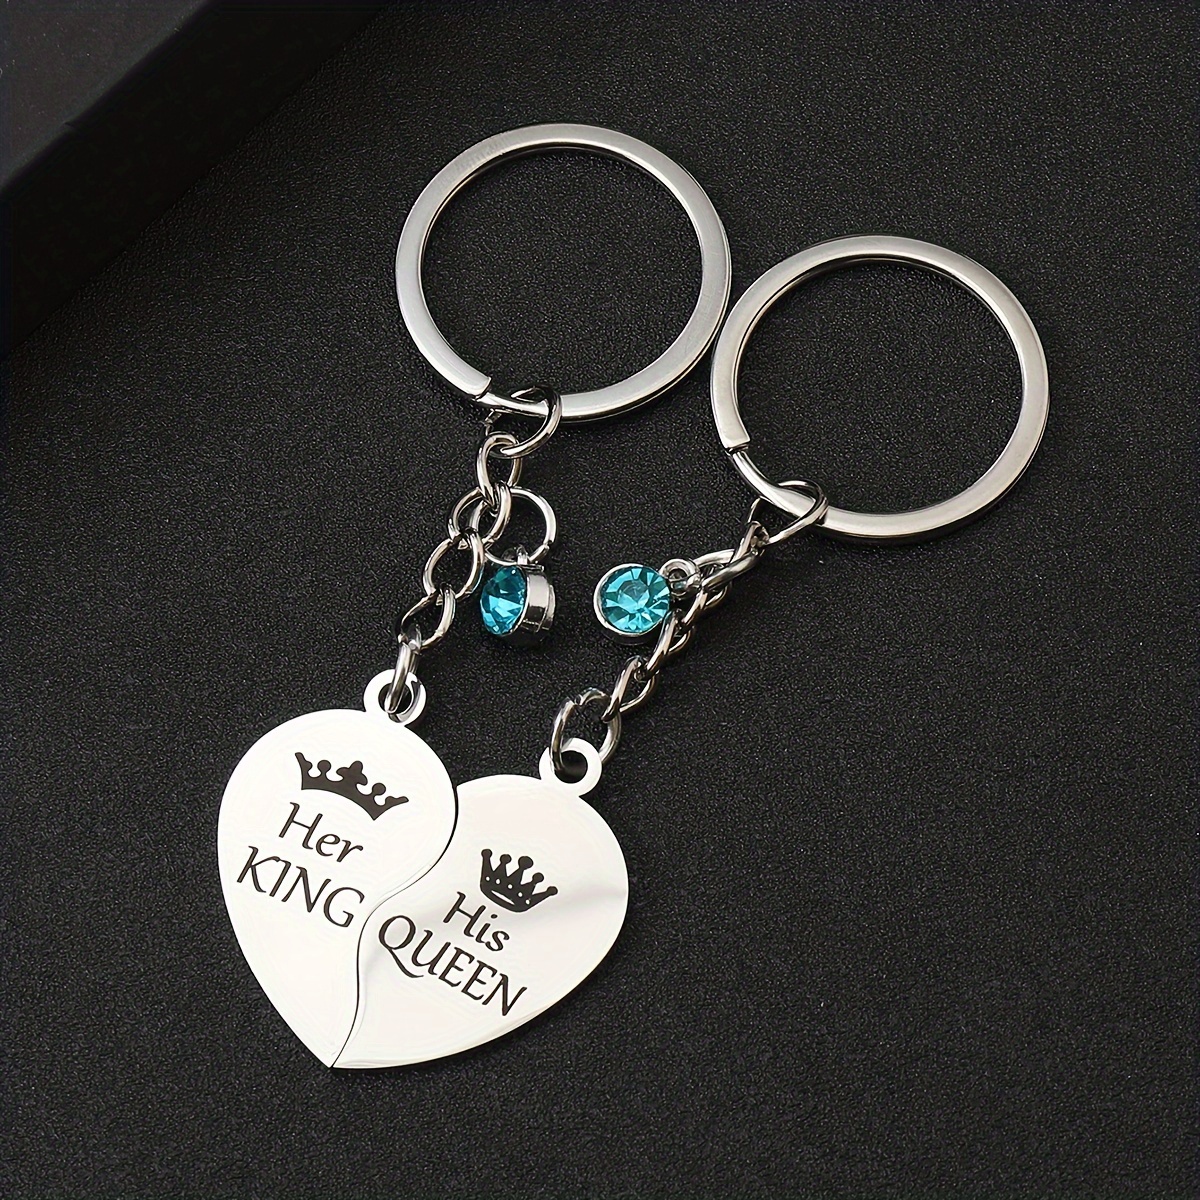 

2pcs/set Her King His Queen Keychain Matching Heart Stainless Steel Key Chain Ring Valentine's Day Wedding Day Gift For Women Men